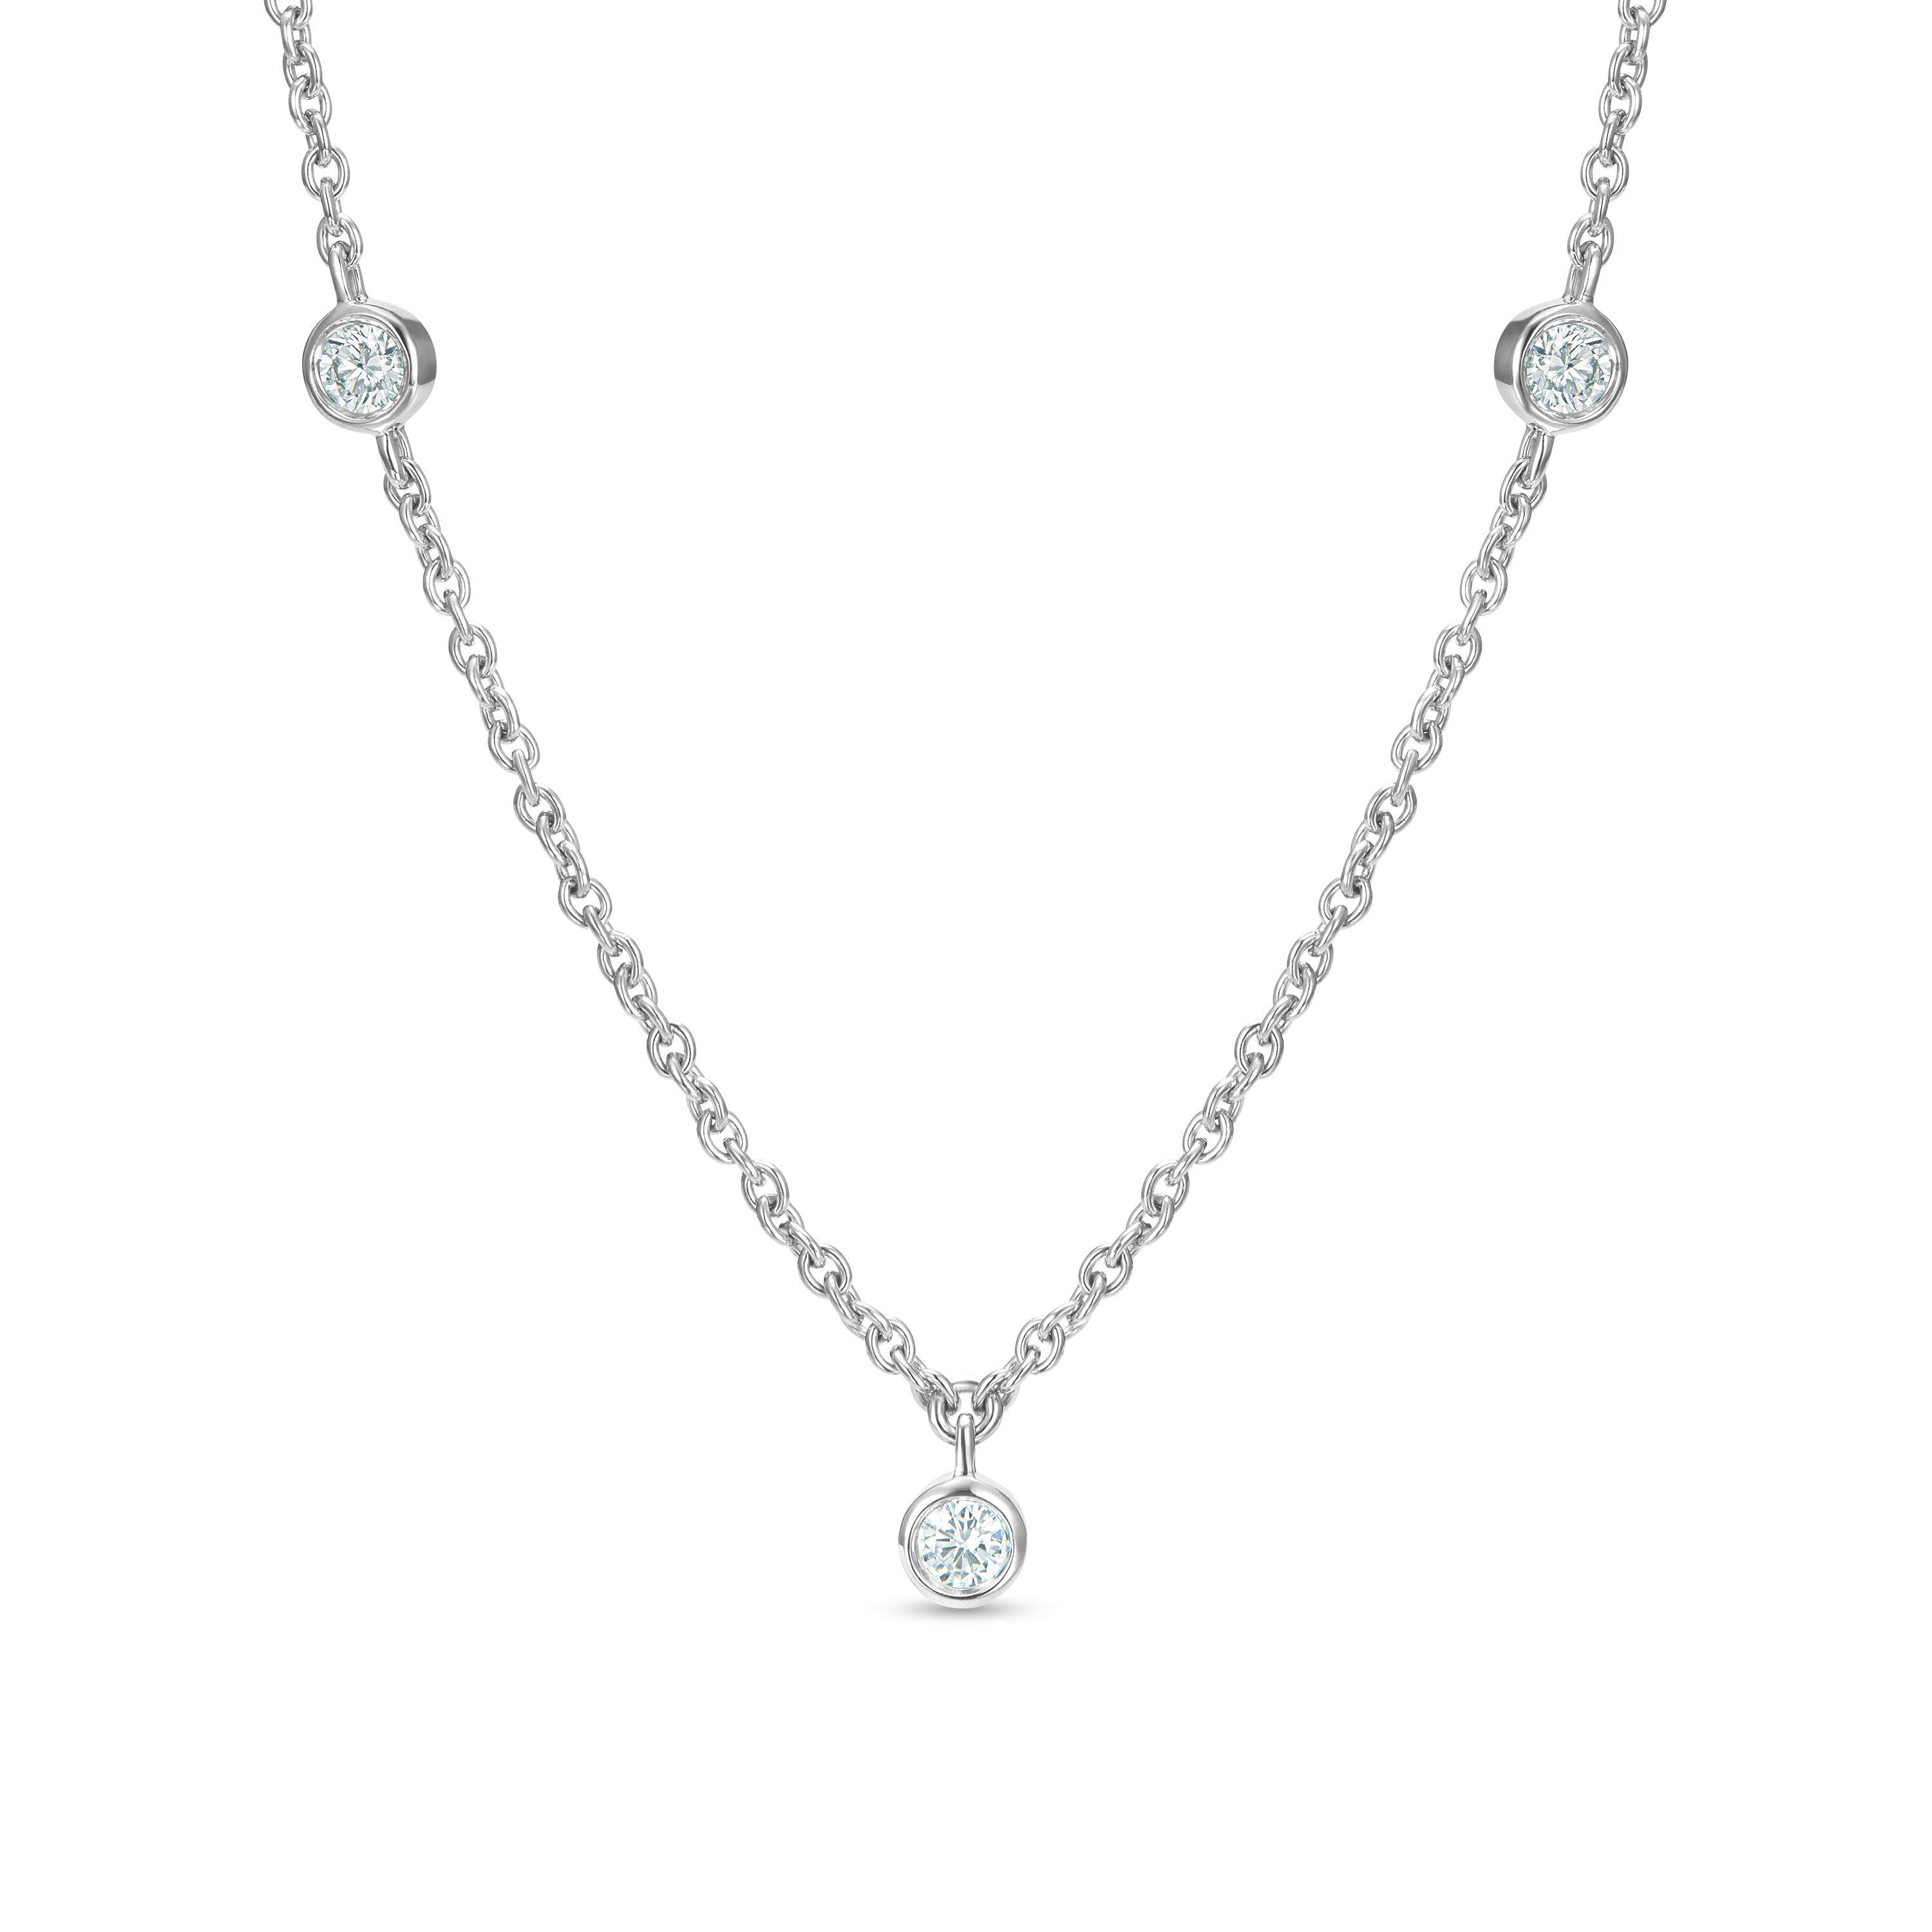 de Beers Jewellers 18kt White Gold My First de Beers Aura Pear-Shaped Diamond Pendant Necklace